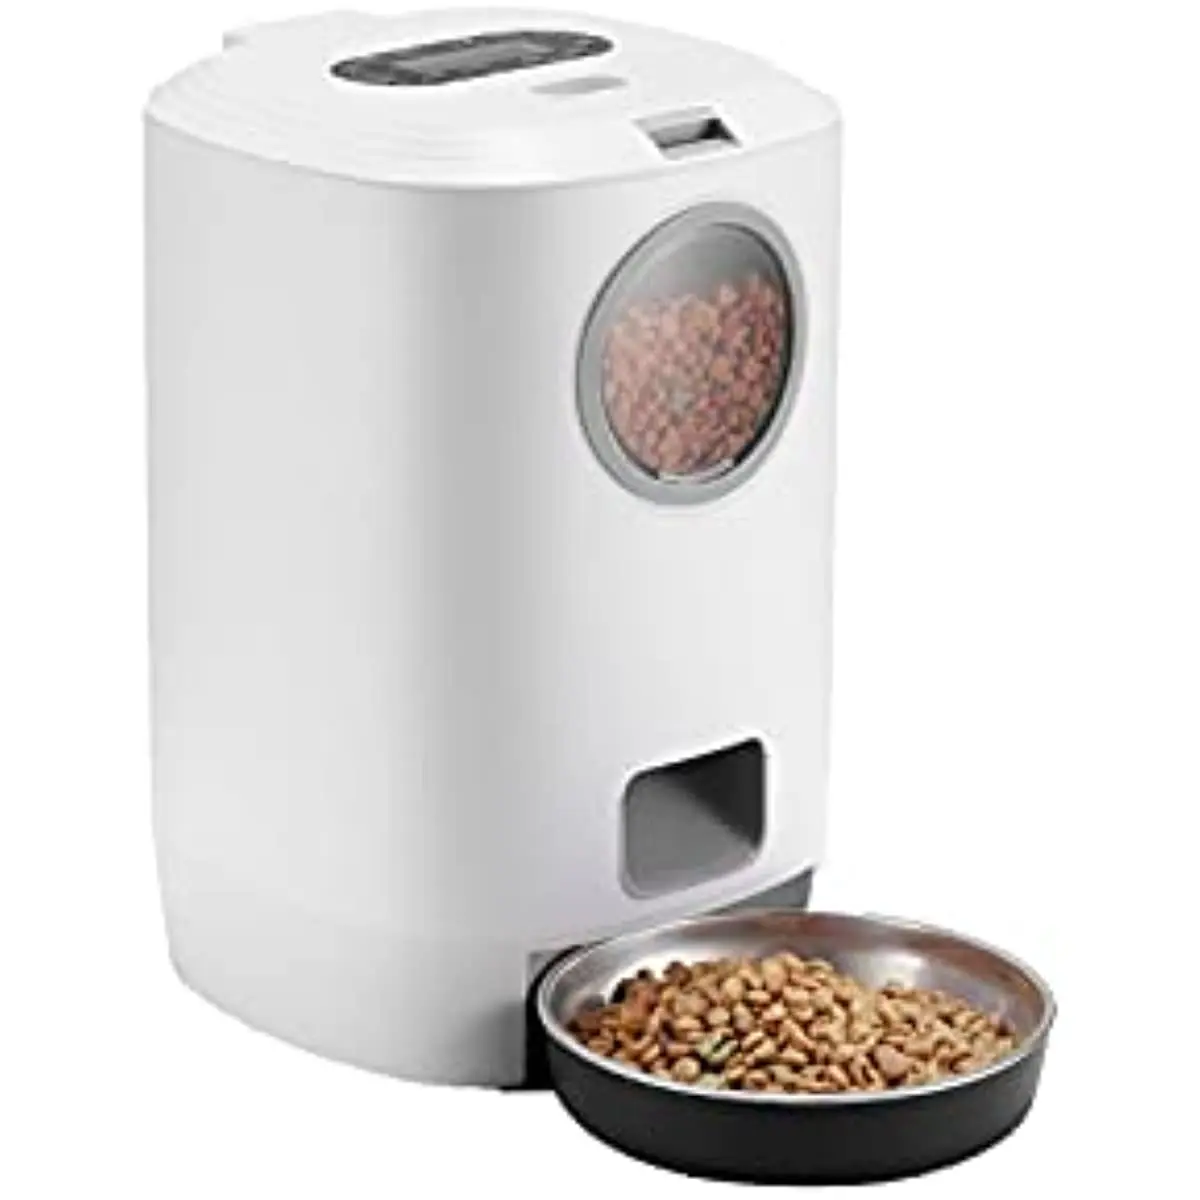 

4.5L Automatic Cat Feeder With Vsible Windows Smart Pet Feeder for Cat and Dogs Auto 4 Meals Feeding Button Control Dog Feeder